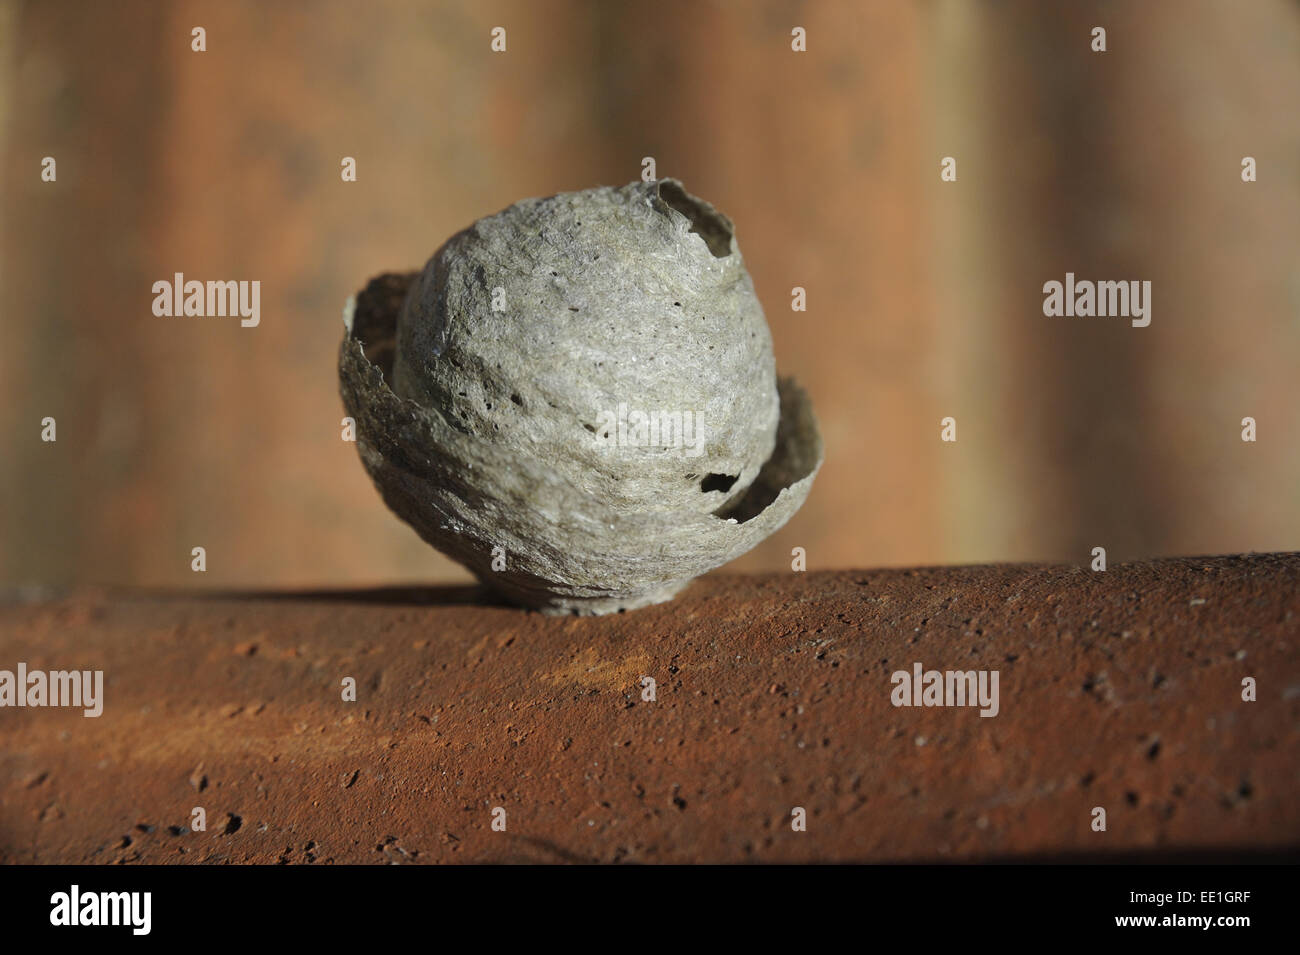 Common Wasp (Vespula vulgaris) nest in early stages, on underside of roof tile, Bentley, Suffolk, England, April Stock Photo